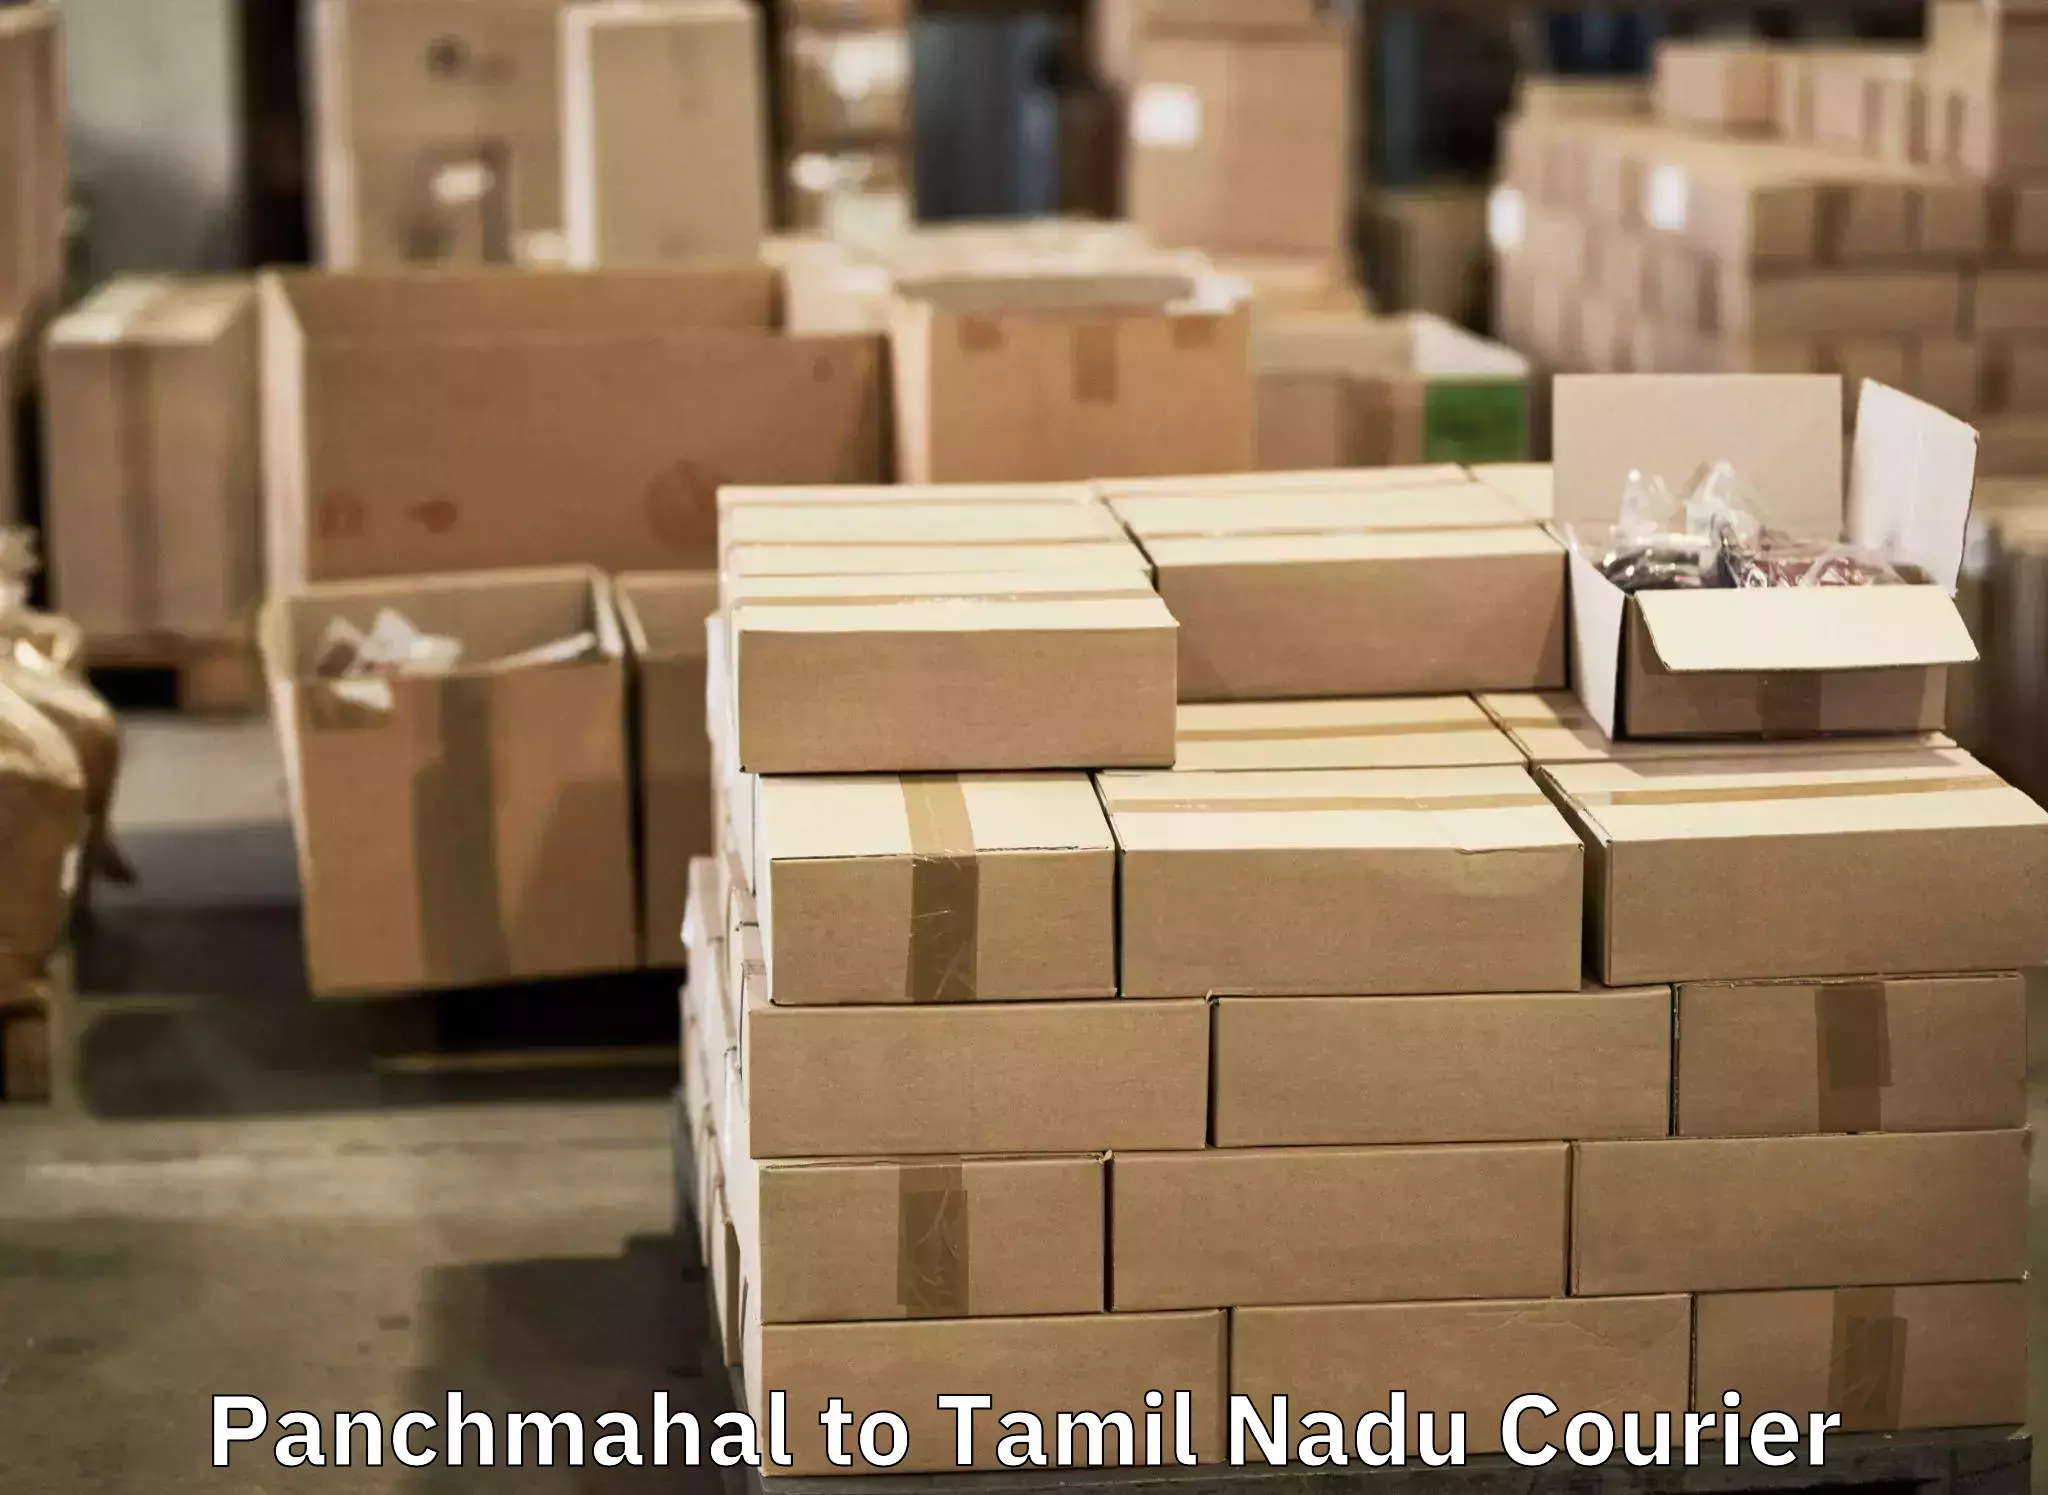 Door-to-door baggage service Panchmahal to SRM Institute of Science and Technology Chennai